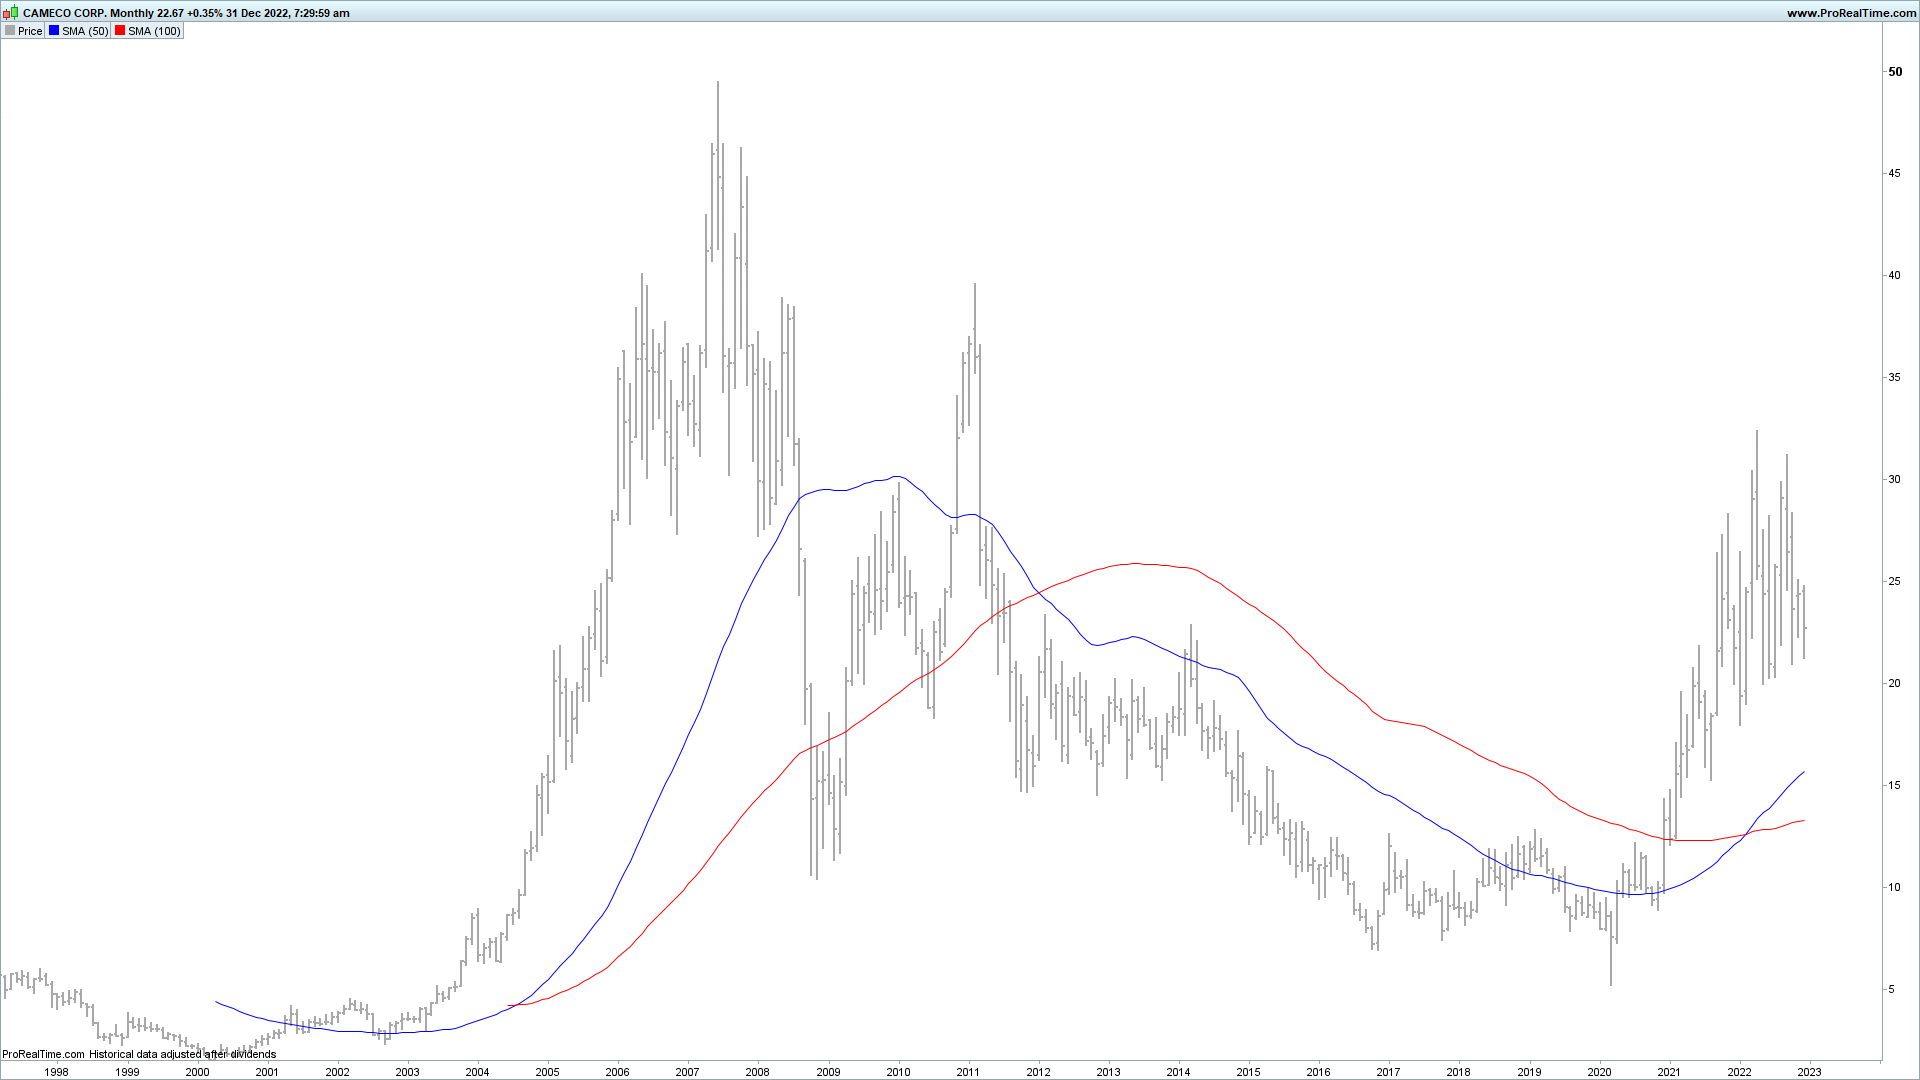 Monthly Chart Cameco (NYSE: CCJ) Source: ProRealTime